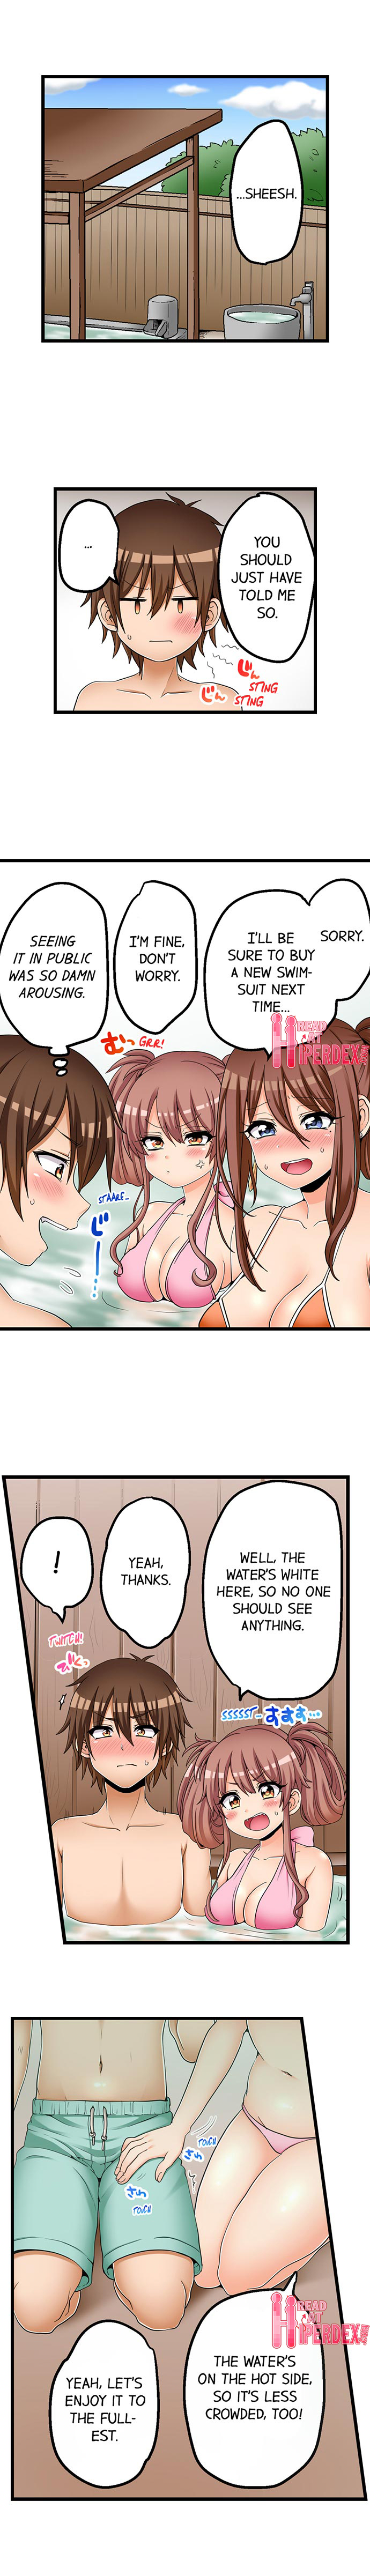 Taking a Hot Tanned Chick’s Virginity - Chapter 16 Page 8